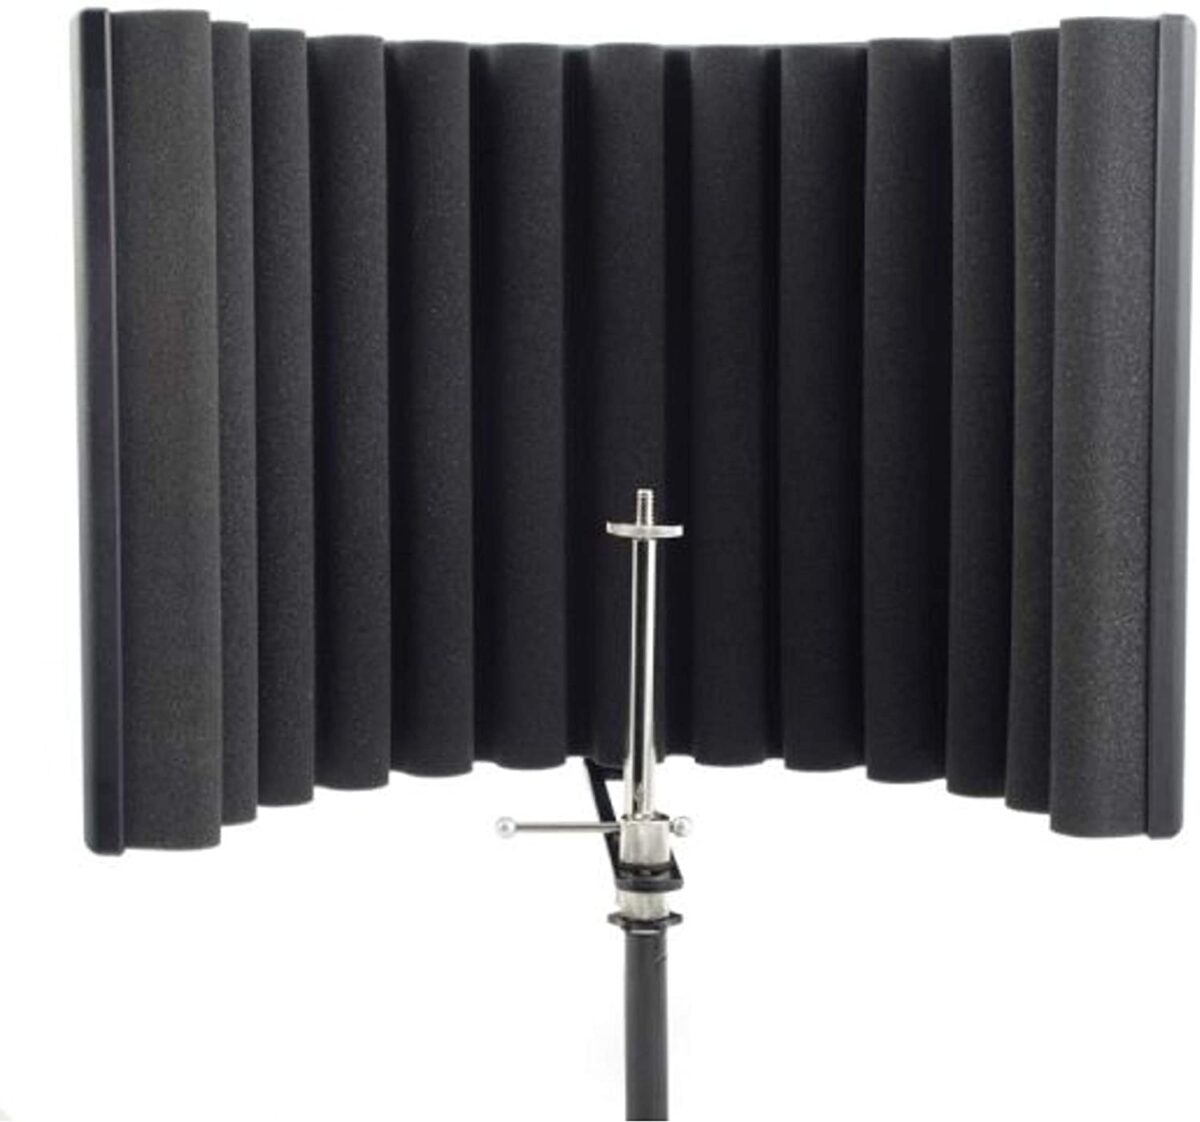 sE Electronics RF-X Reflexion Filter Vocal Booth ( Red )